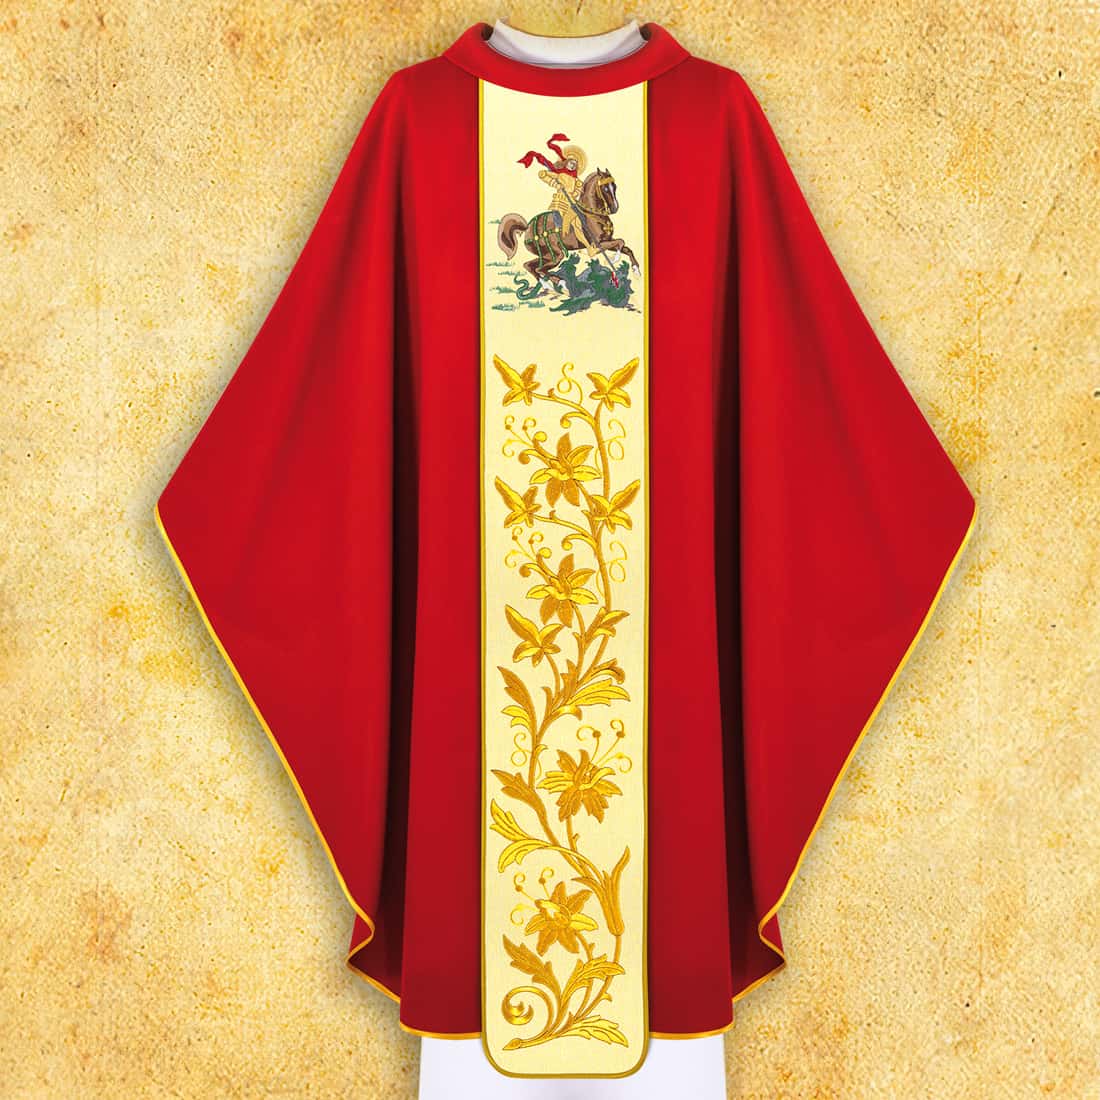 Chasuble with an embroidered image of "St. George"